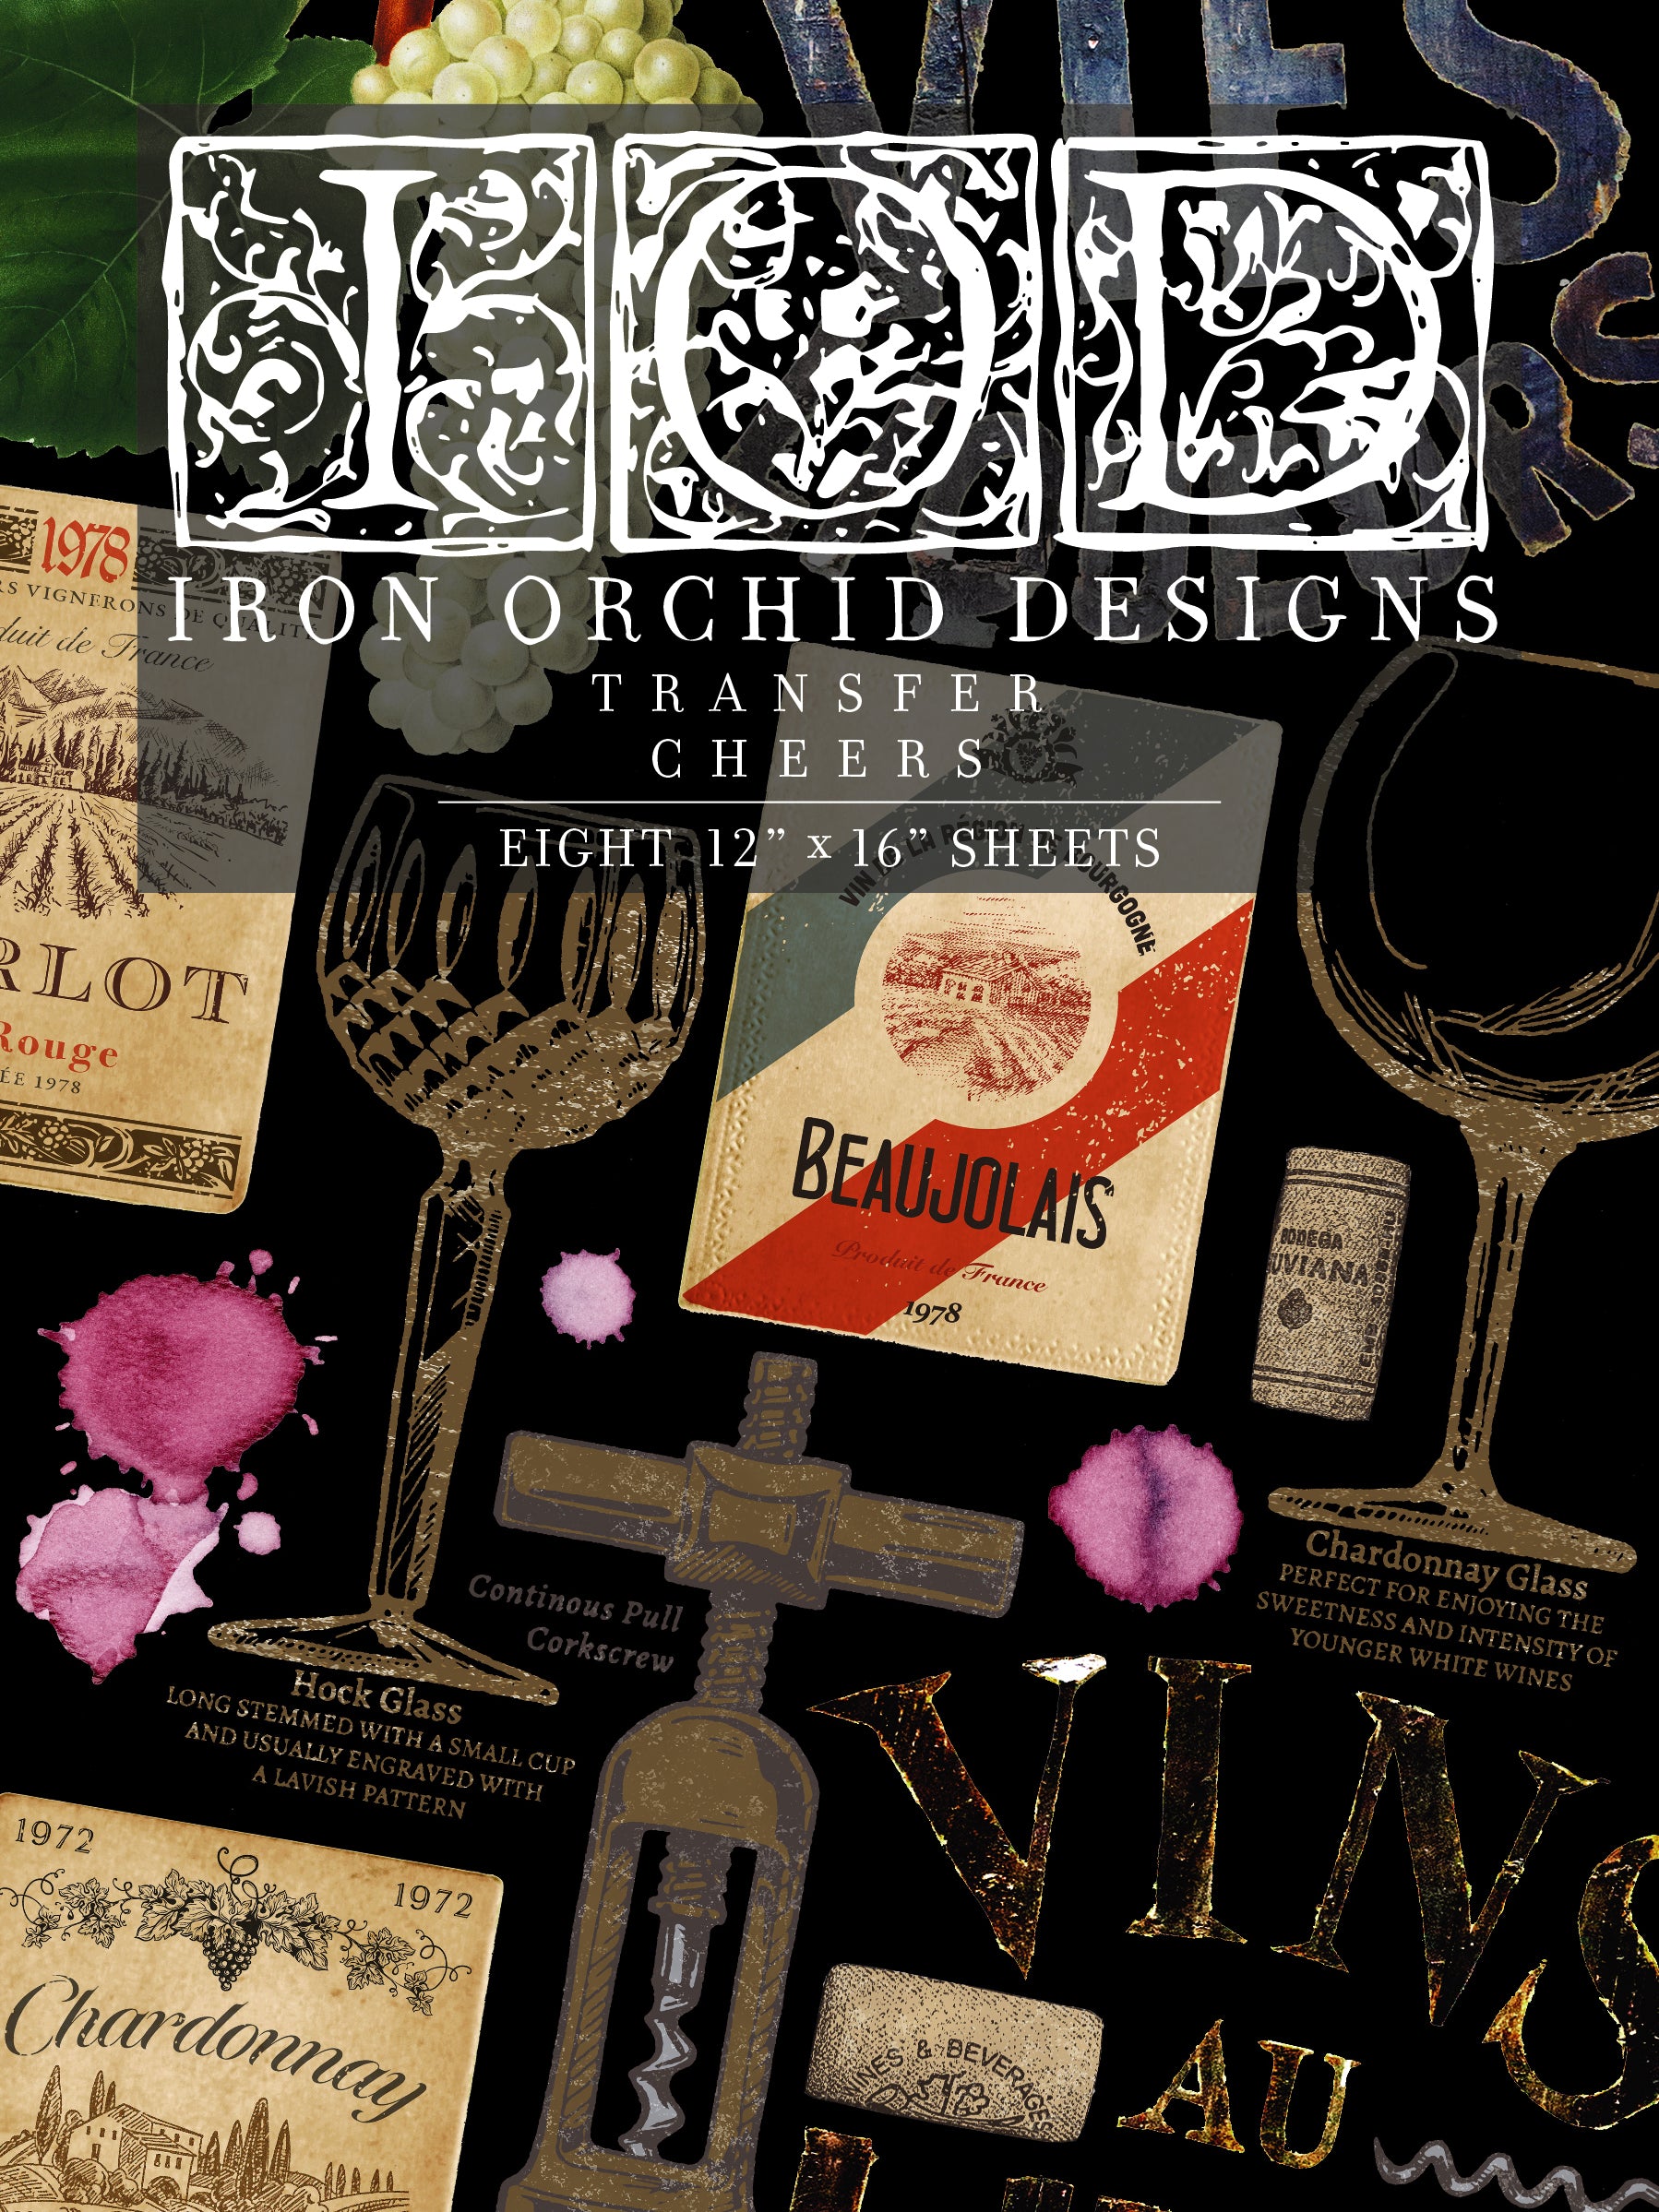 Oh, the things you can do with - IOD - Iron Orchid Designs